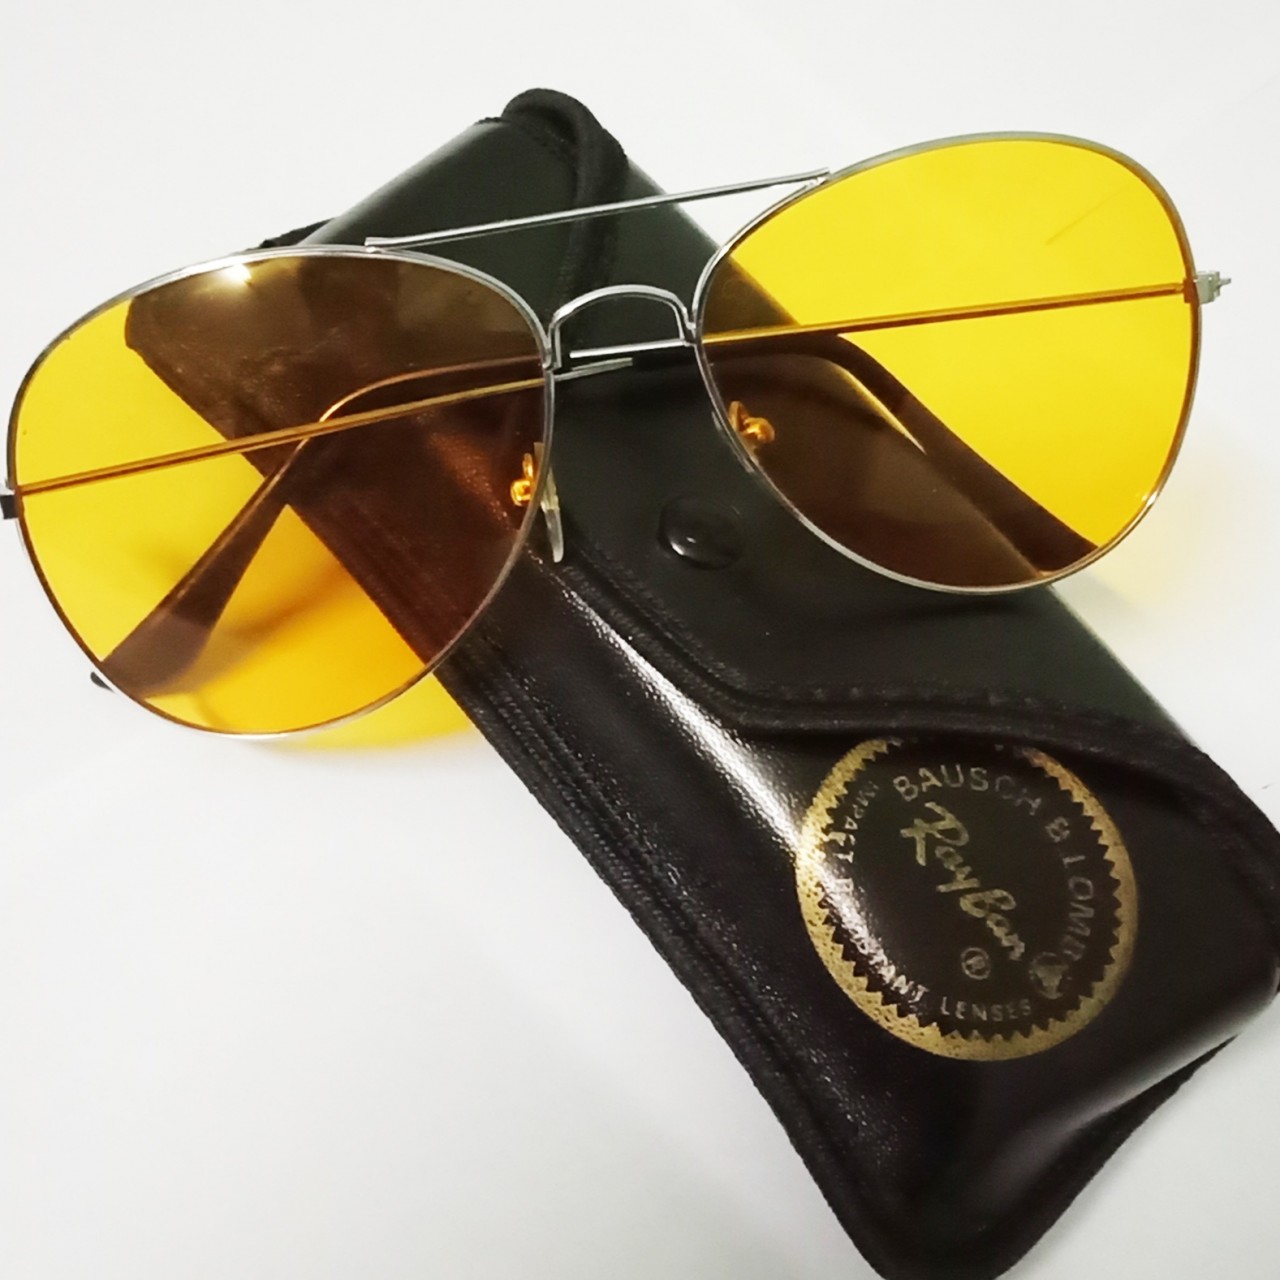 Fashionable unisex sunglasses in yellow color with pouch